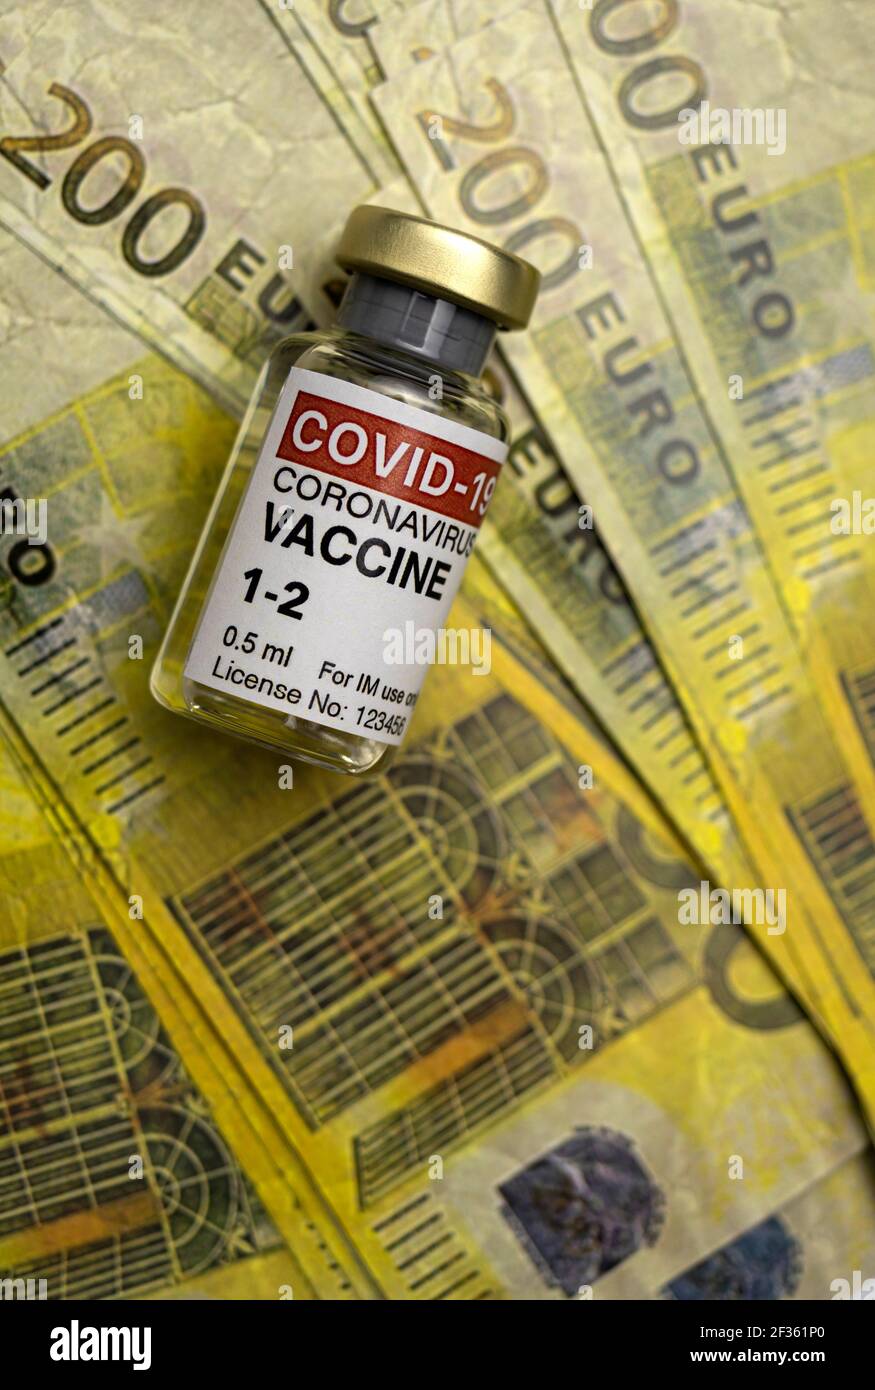 Covid-19 vaccine next to several two hundred euro banknotes, concept image Stock Photo